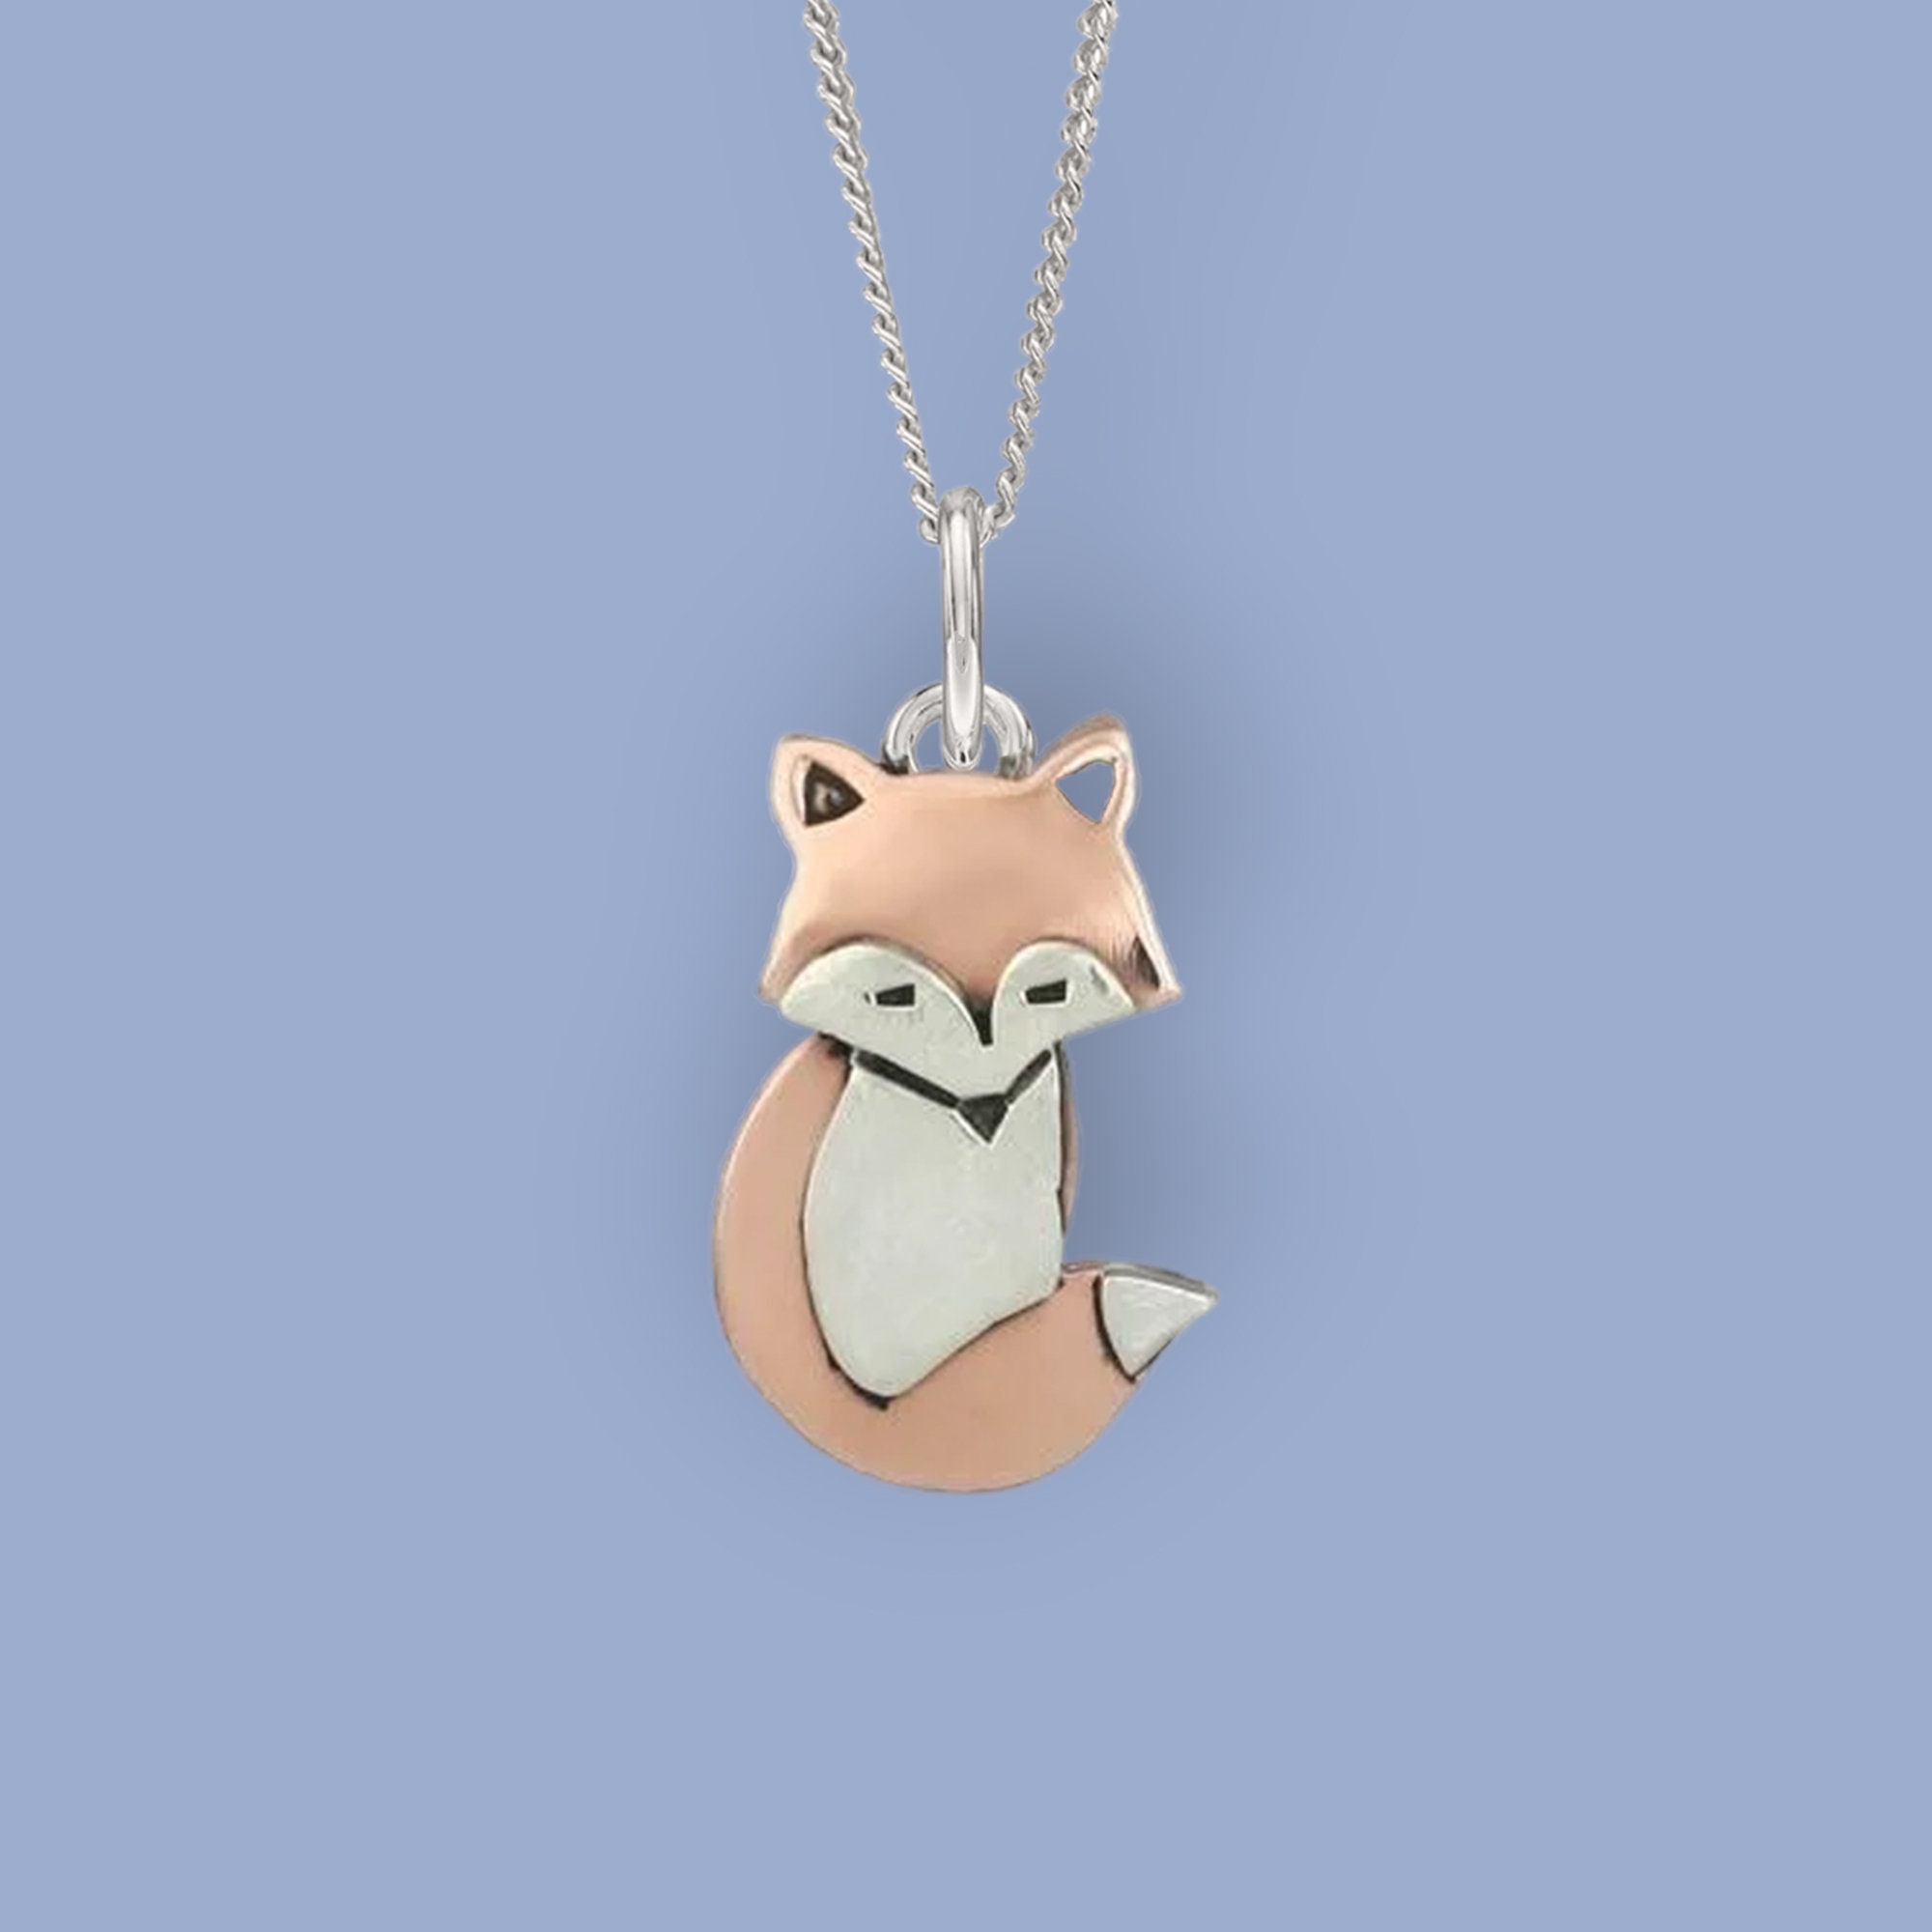 Red Fox Under A Silver Moon Pendant - Beth Millner Jewelry